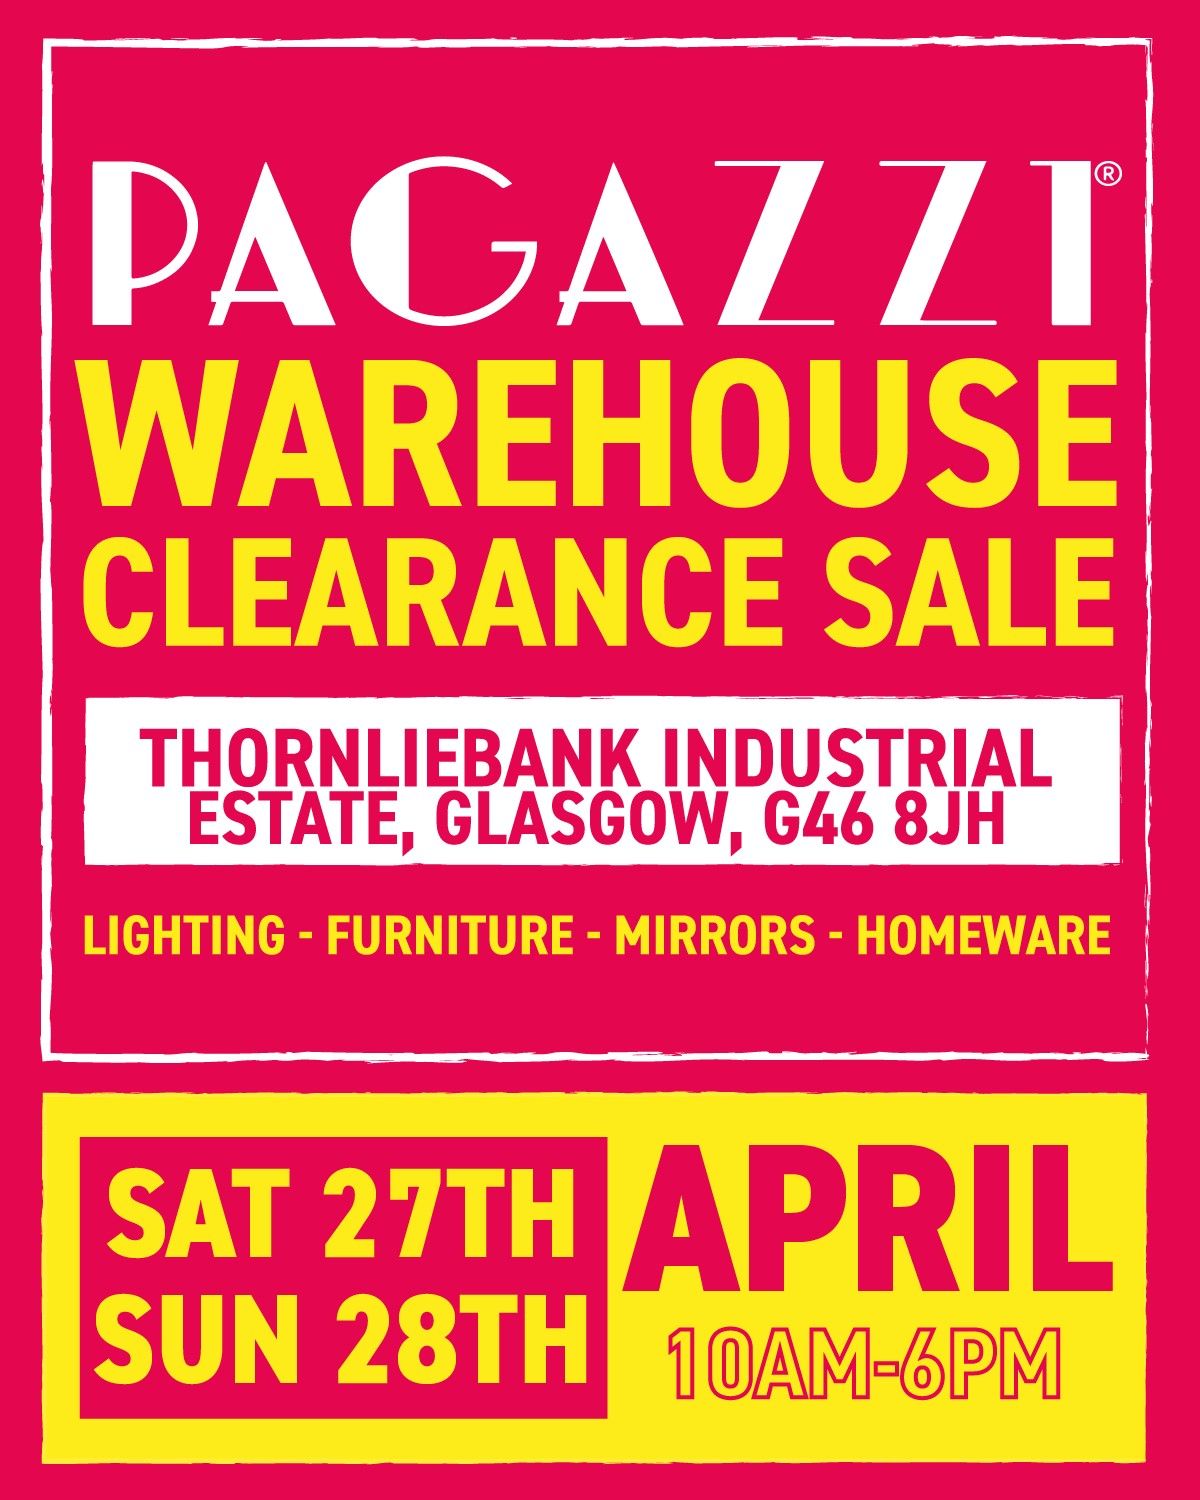 !PAGAZZI WAREHOUSE SALE - THIS WEEKEND !